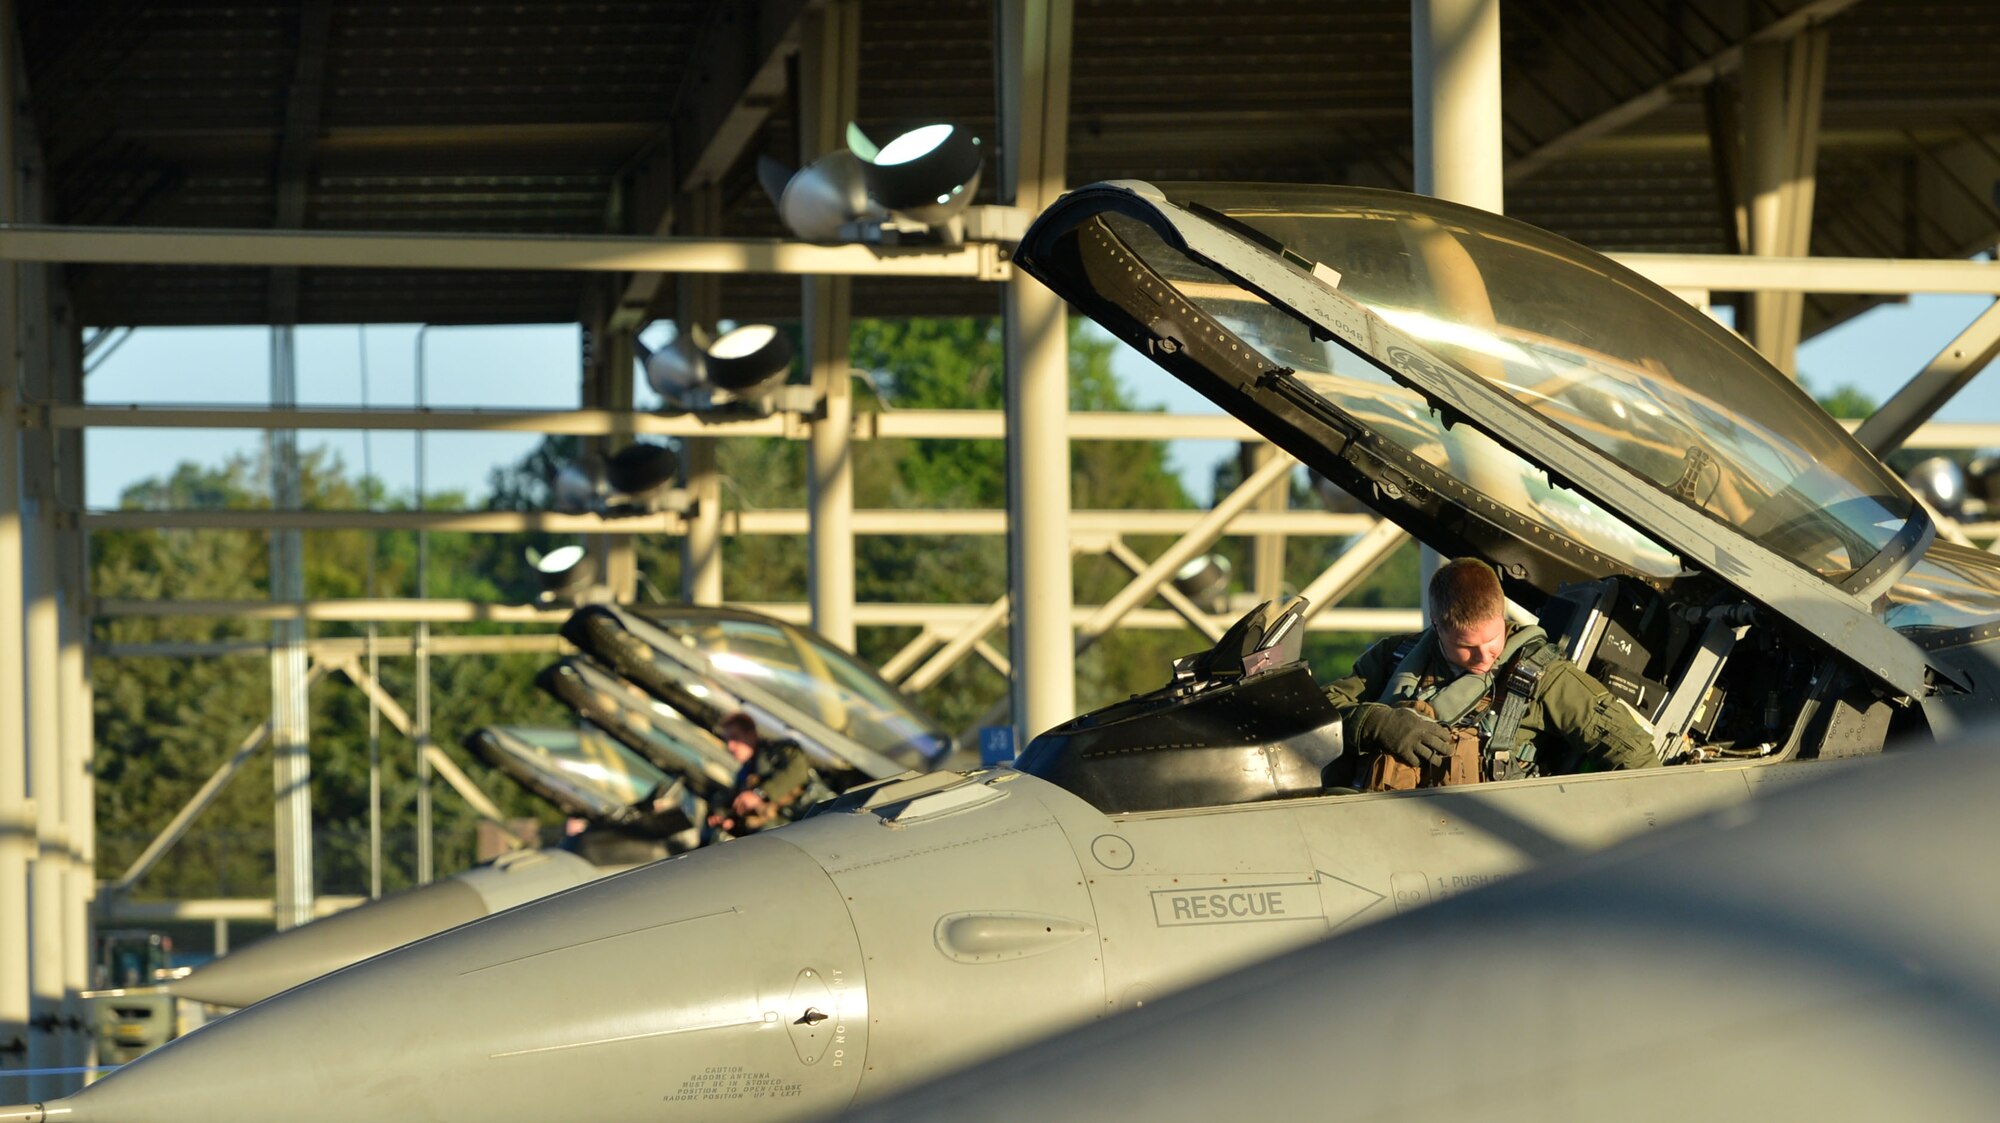 U.S. Air Force pilots assigned to the 20th Fighter Wing fasten themselves into their F-16CM Fighting Falcons during operational readiness exercise (ORE) Weasel Victory 17-07 at Shaw Air Force Base, S.C., May 15, 2017. The ORE gave pilots the opportunity to hone their flying skills in a simulated deployed environment. (U.S. Air Force photo by Airman 1st Class Christopher Maldonado)